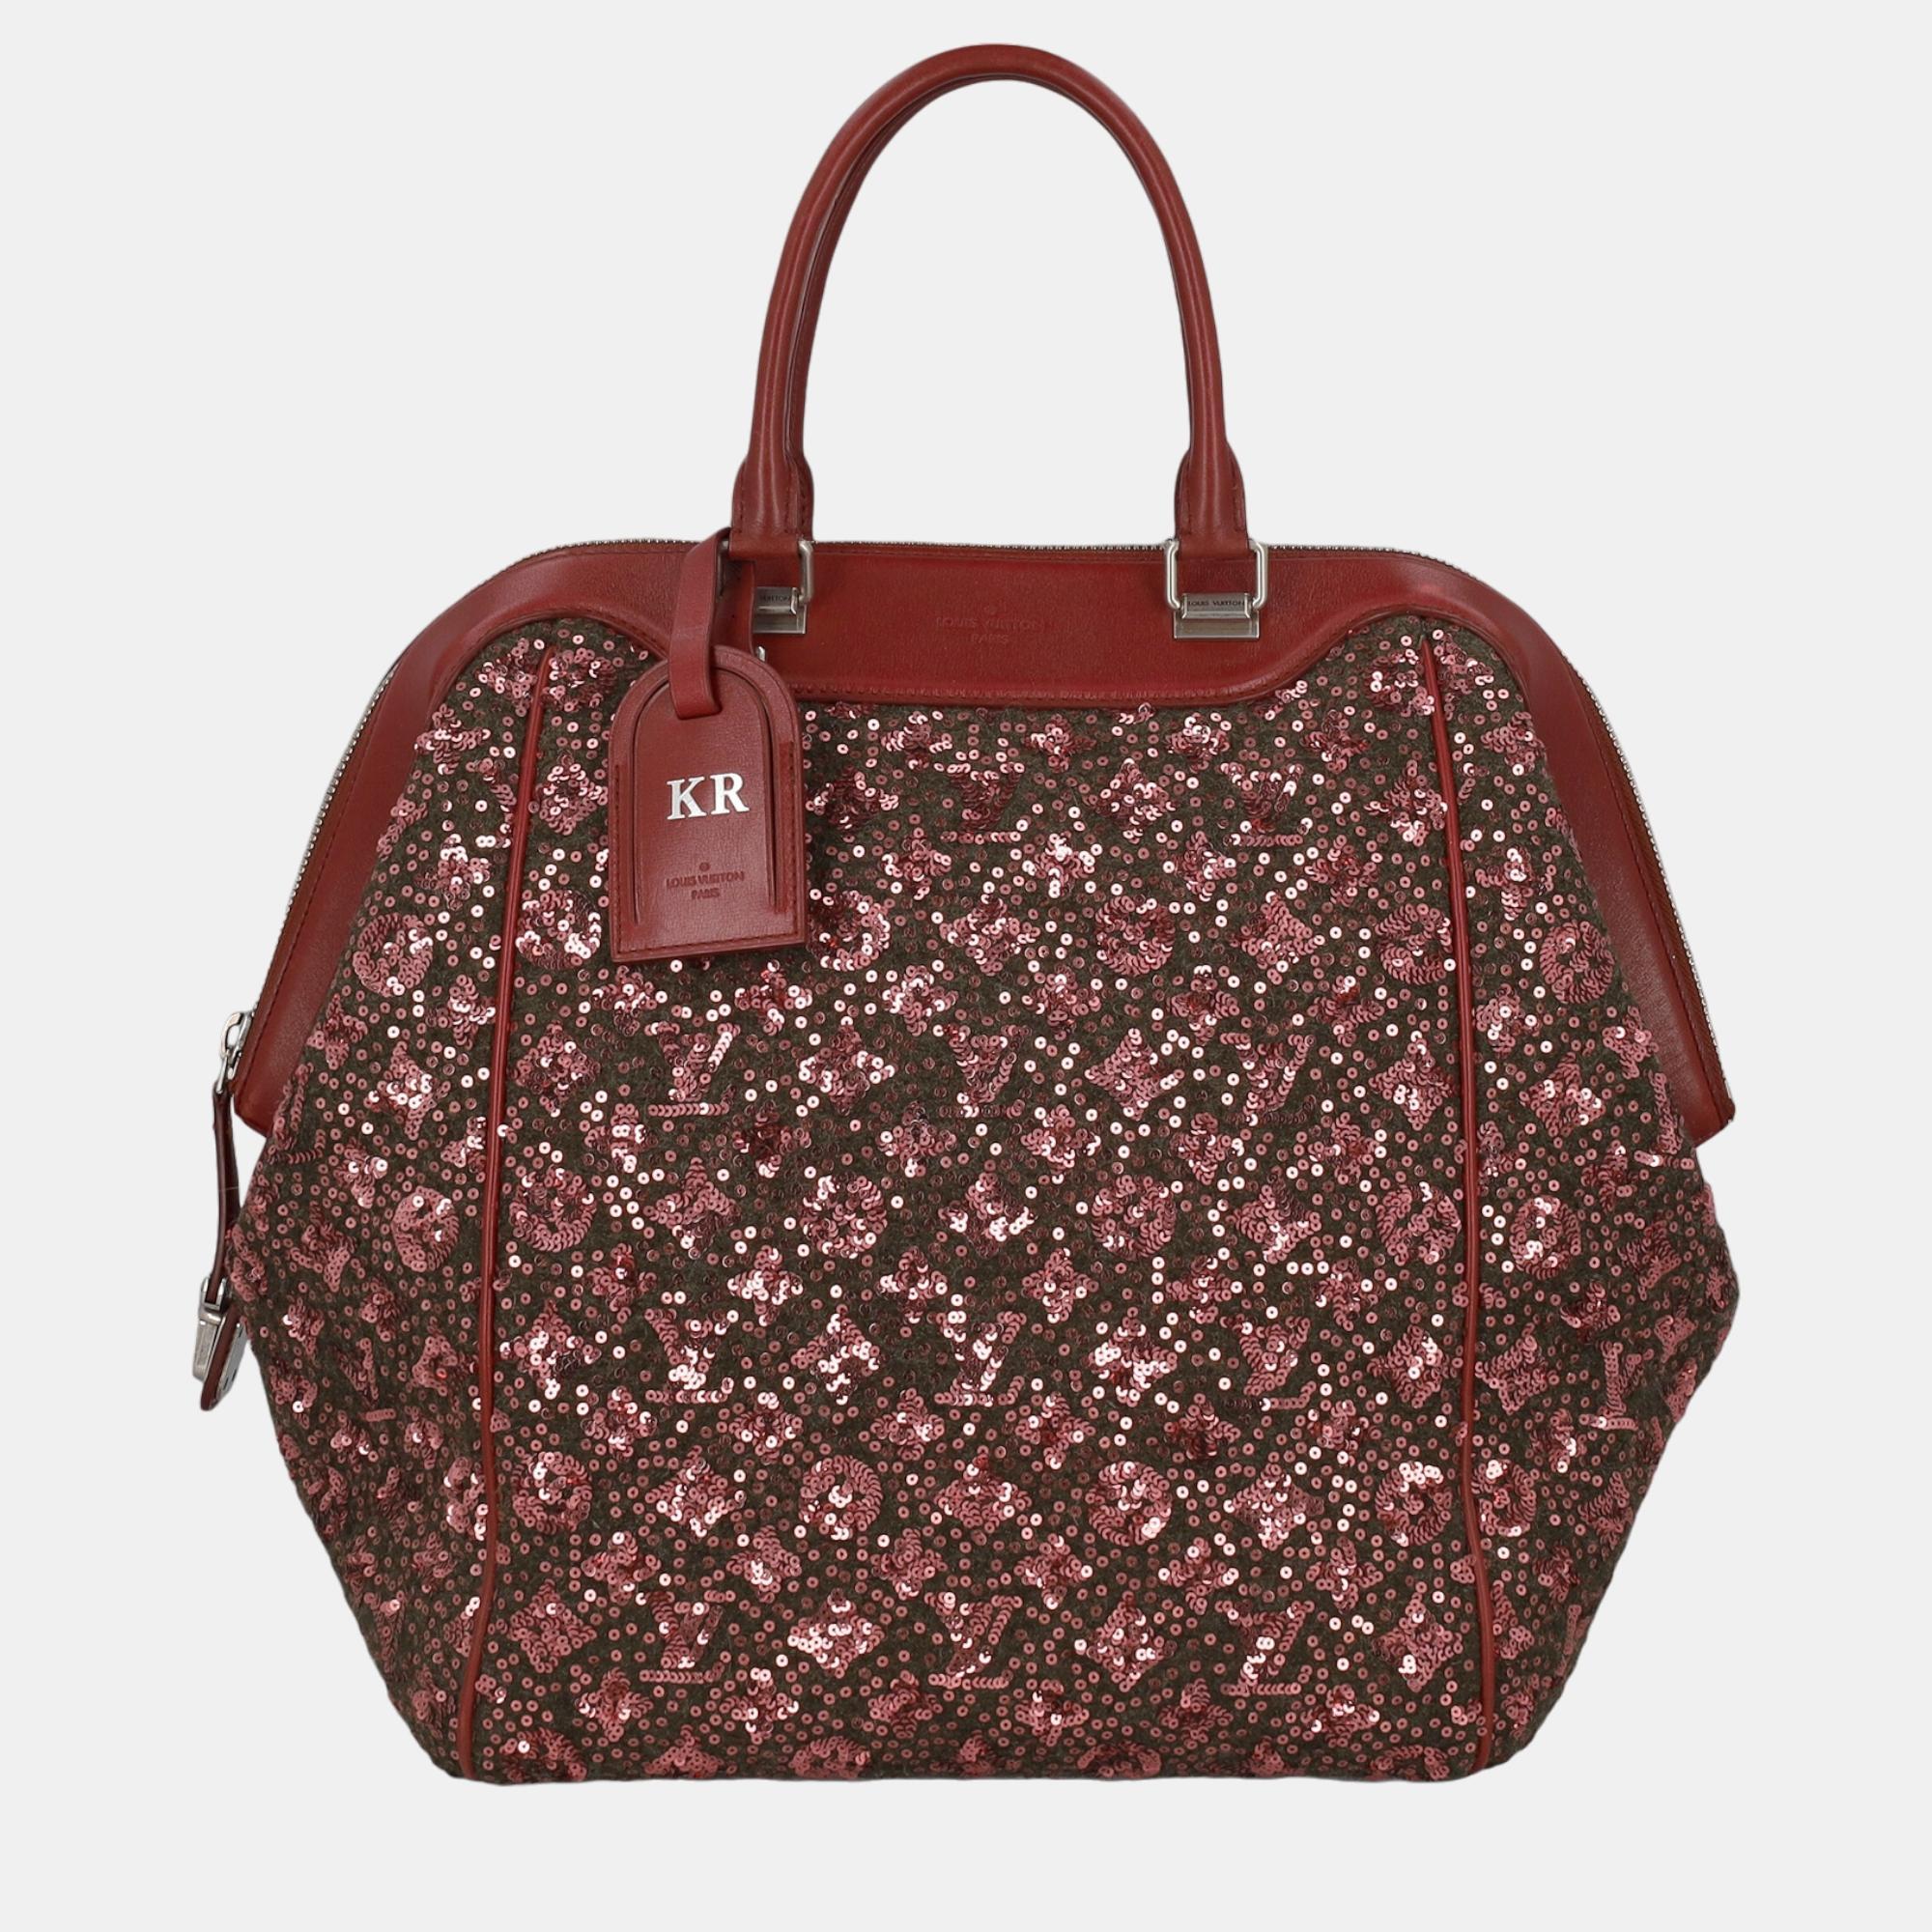 Louis Vuitton  Women's Synthetic Fibers Tote Bag - Burgundy - One Size